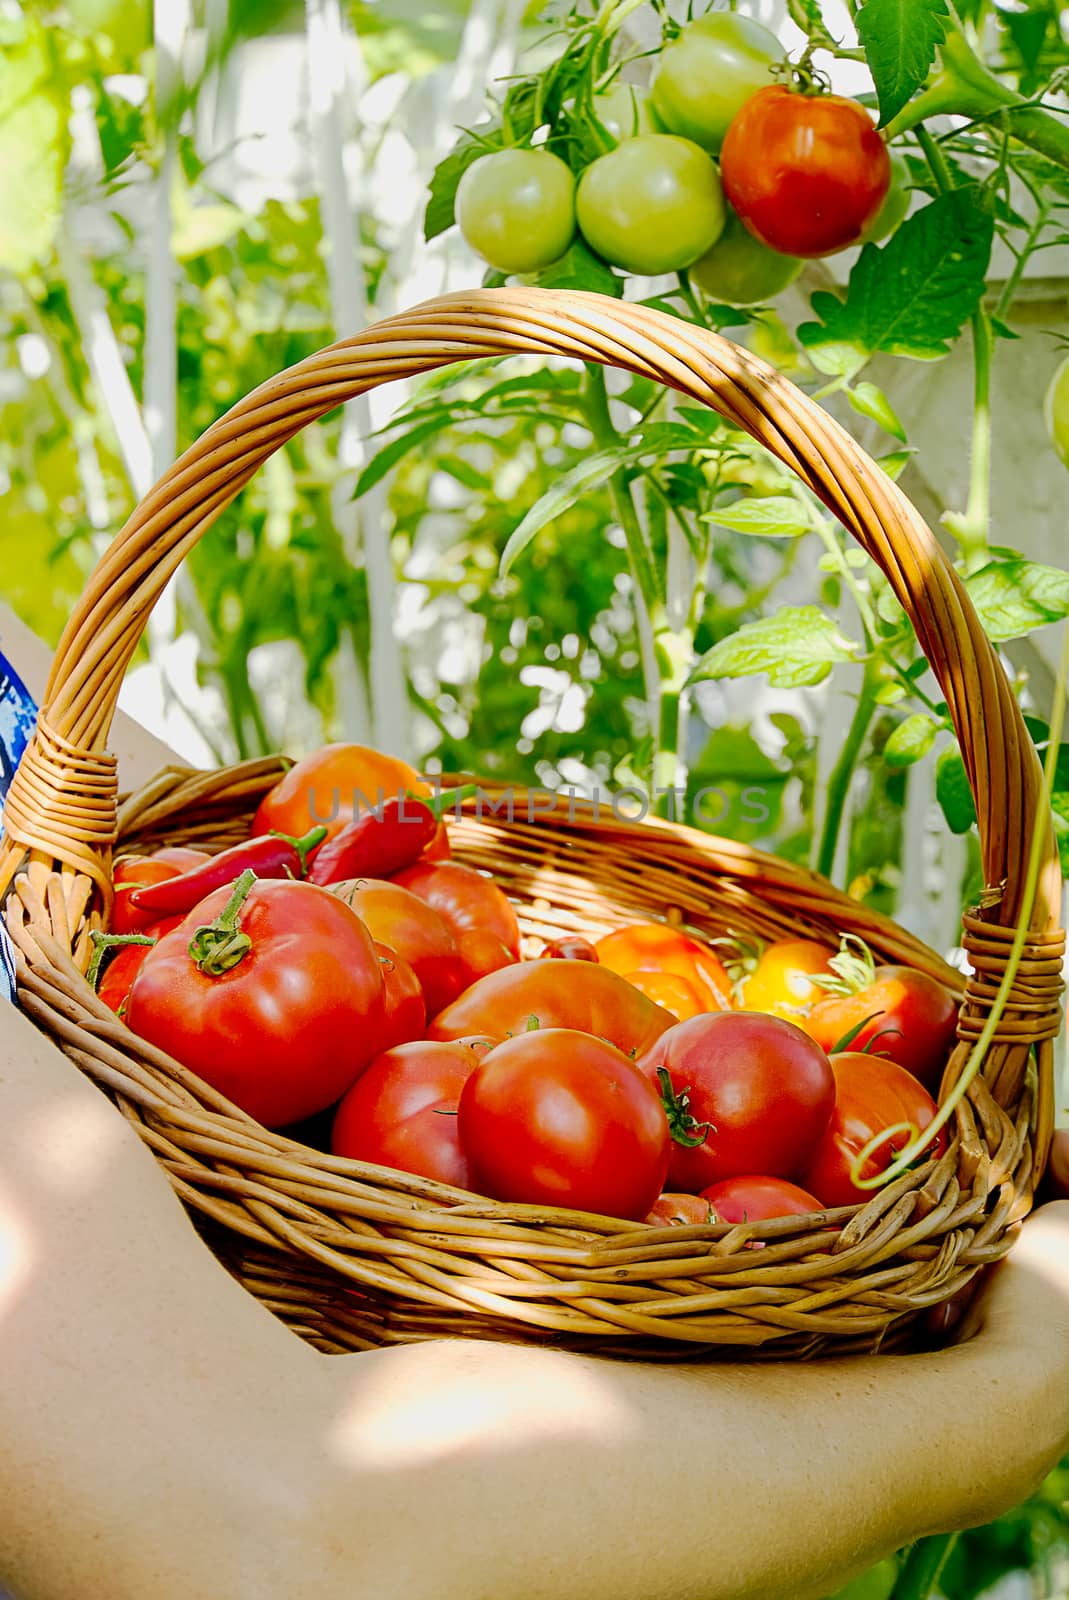 in the greenhouse the girl's hand collects ripe red ecological tomatoes into a wicker basket. eco food home gardening concept